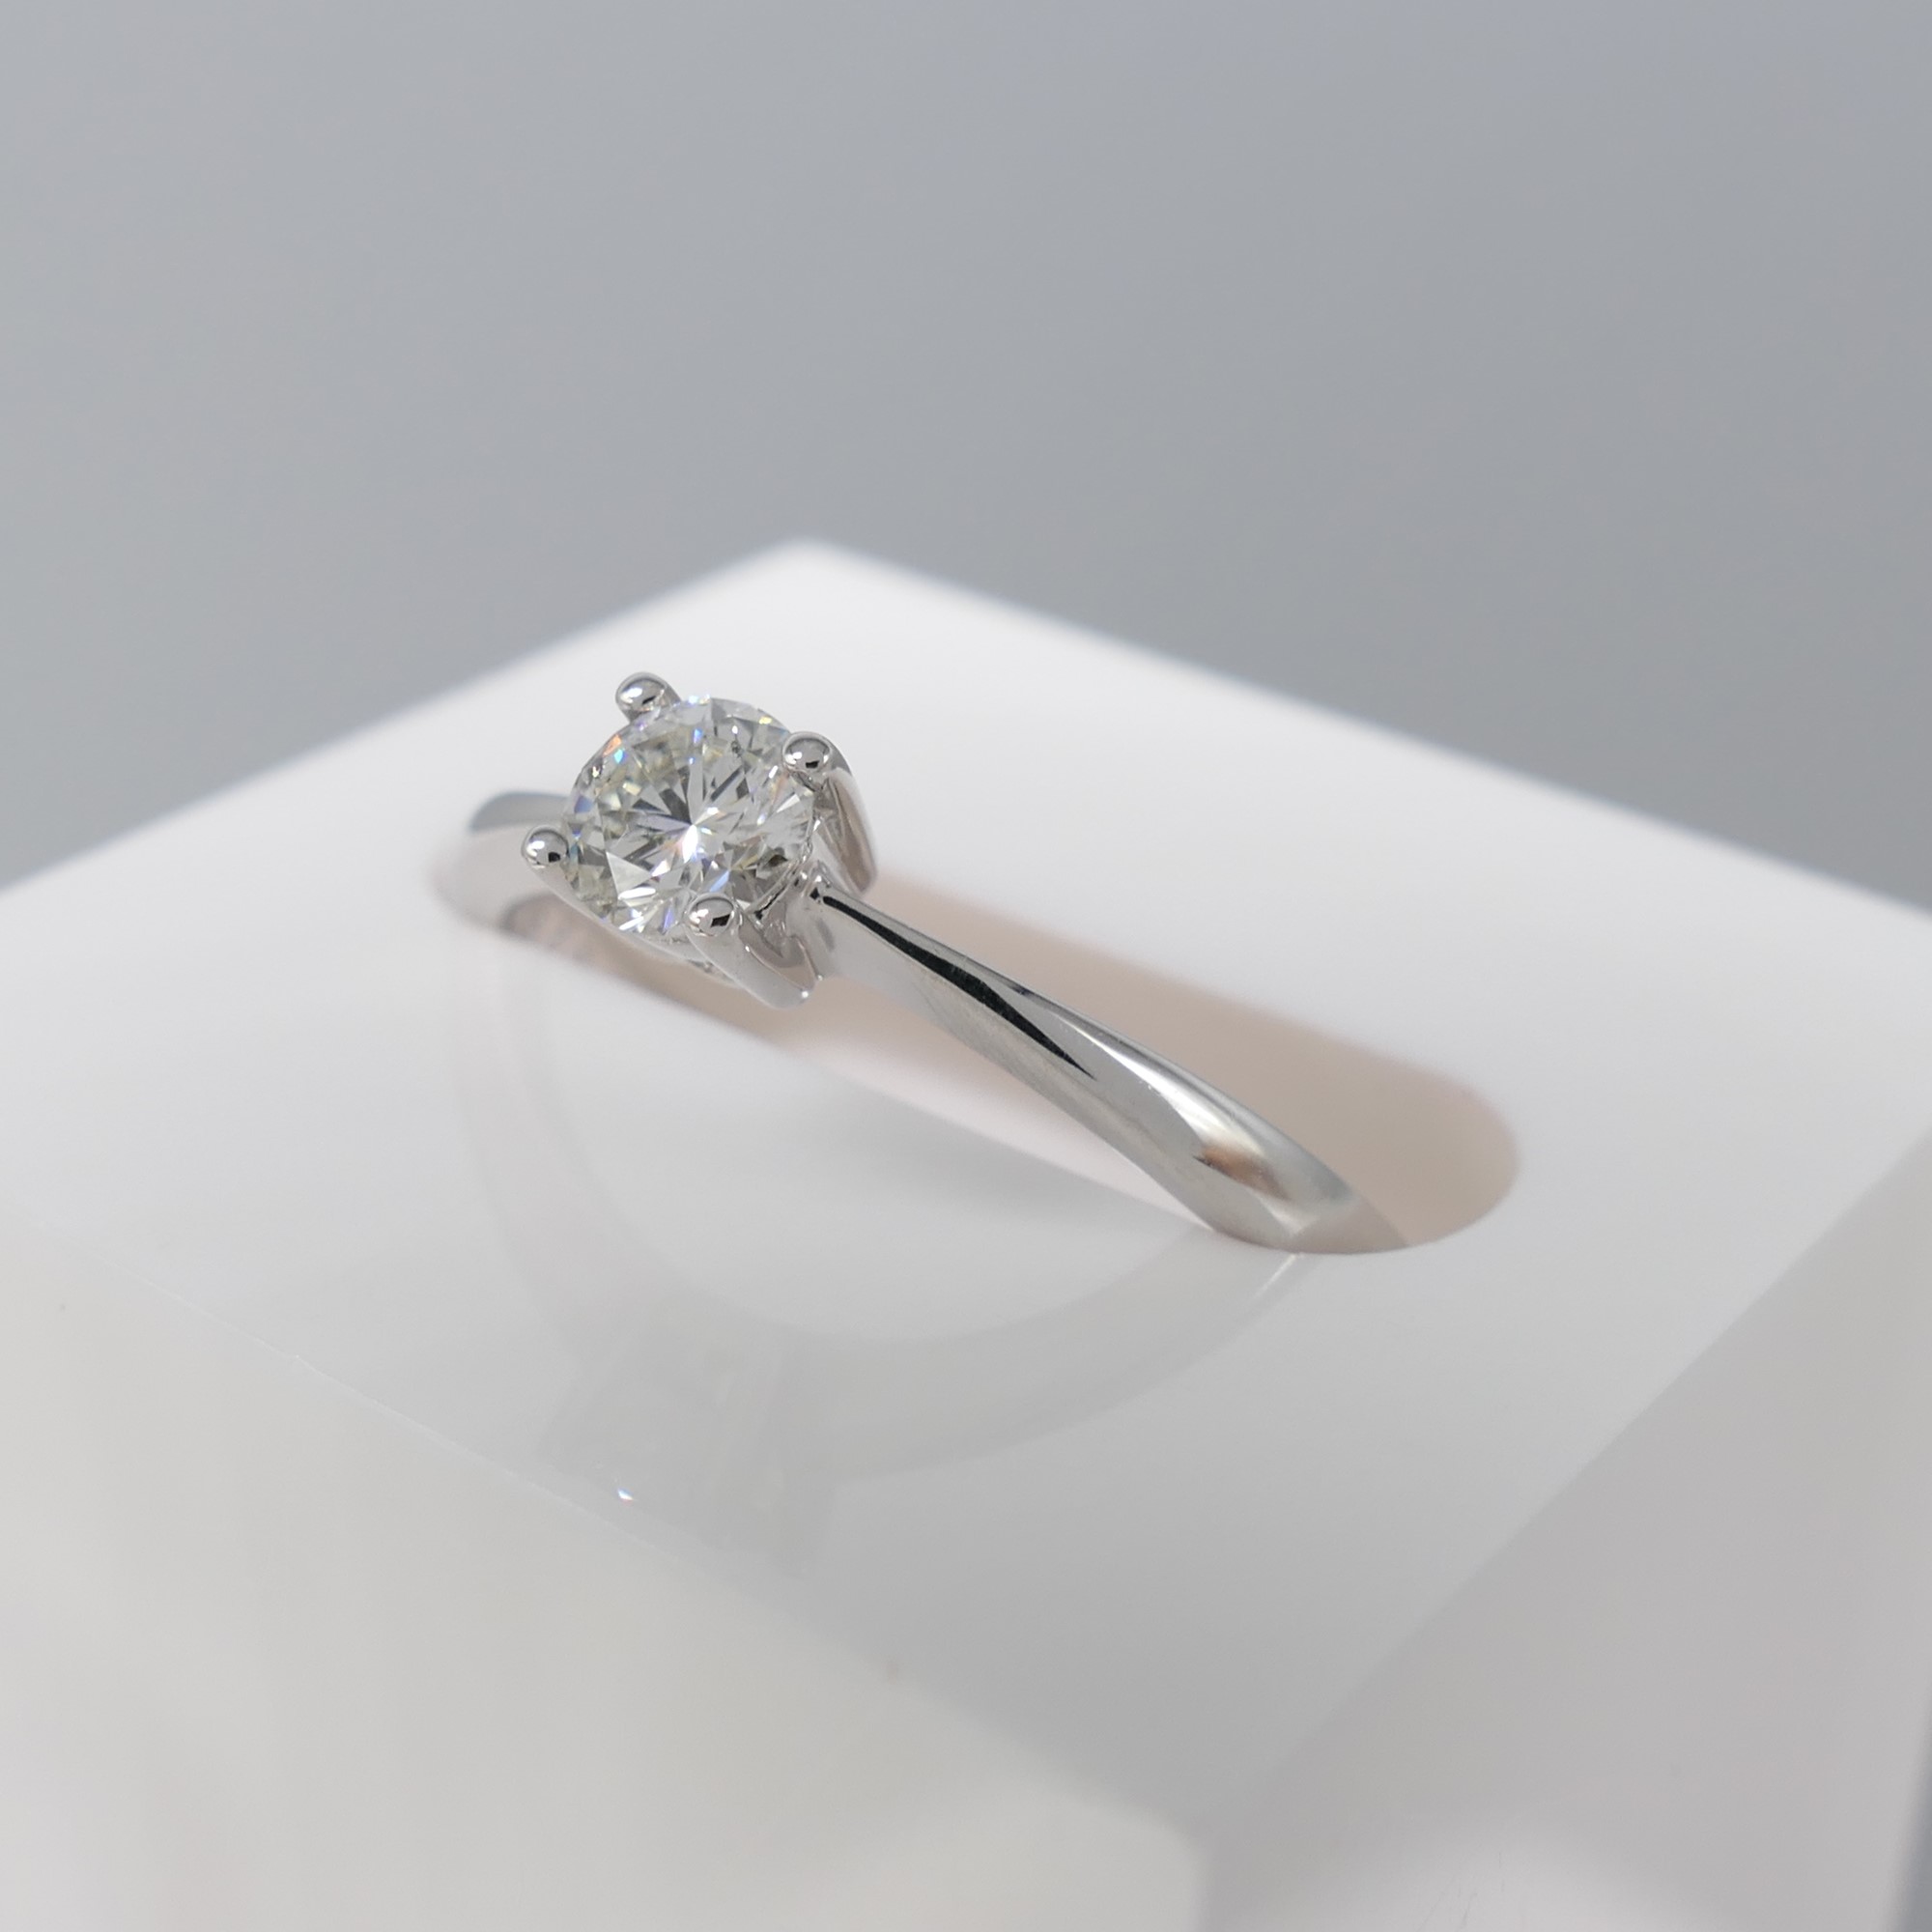 Round Brilliant-Cut 0.25 Carat Diamond Solitaire Ring In 9K White Gold - Image 3 of 7